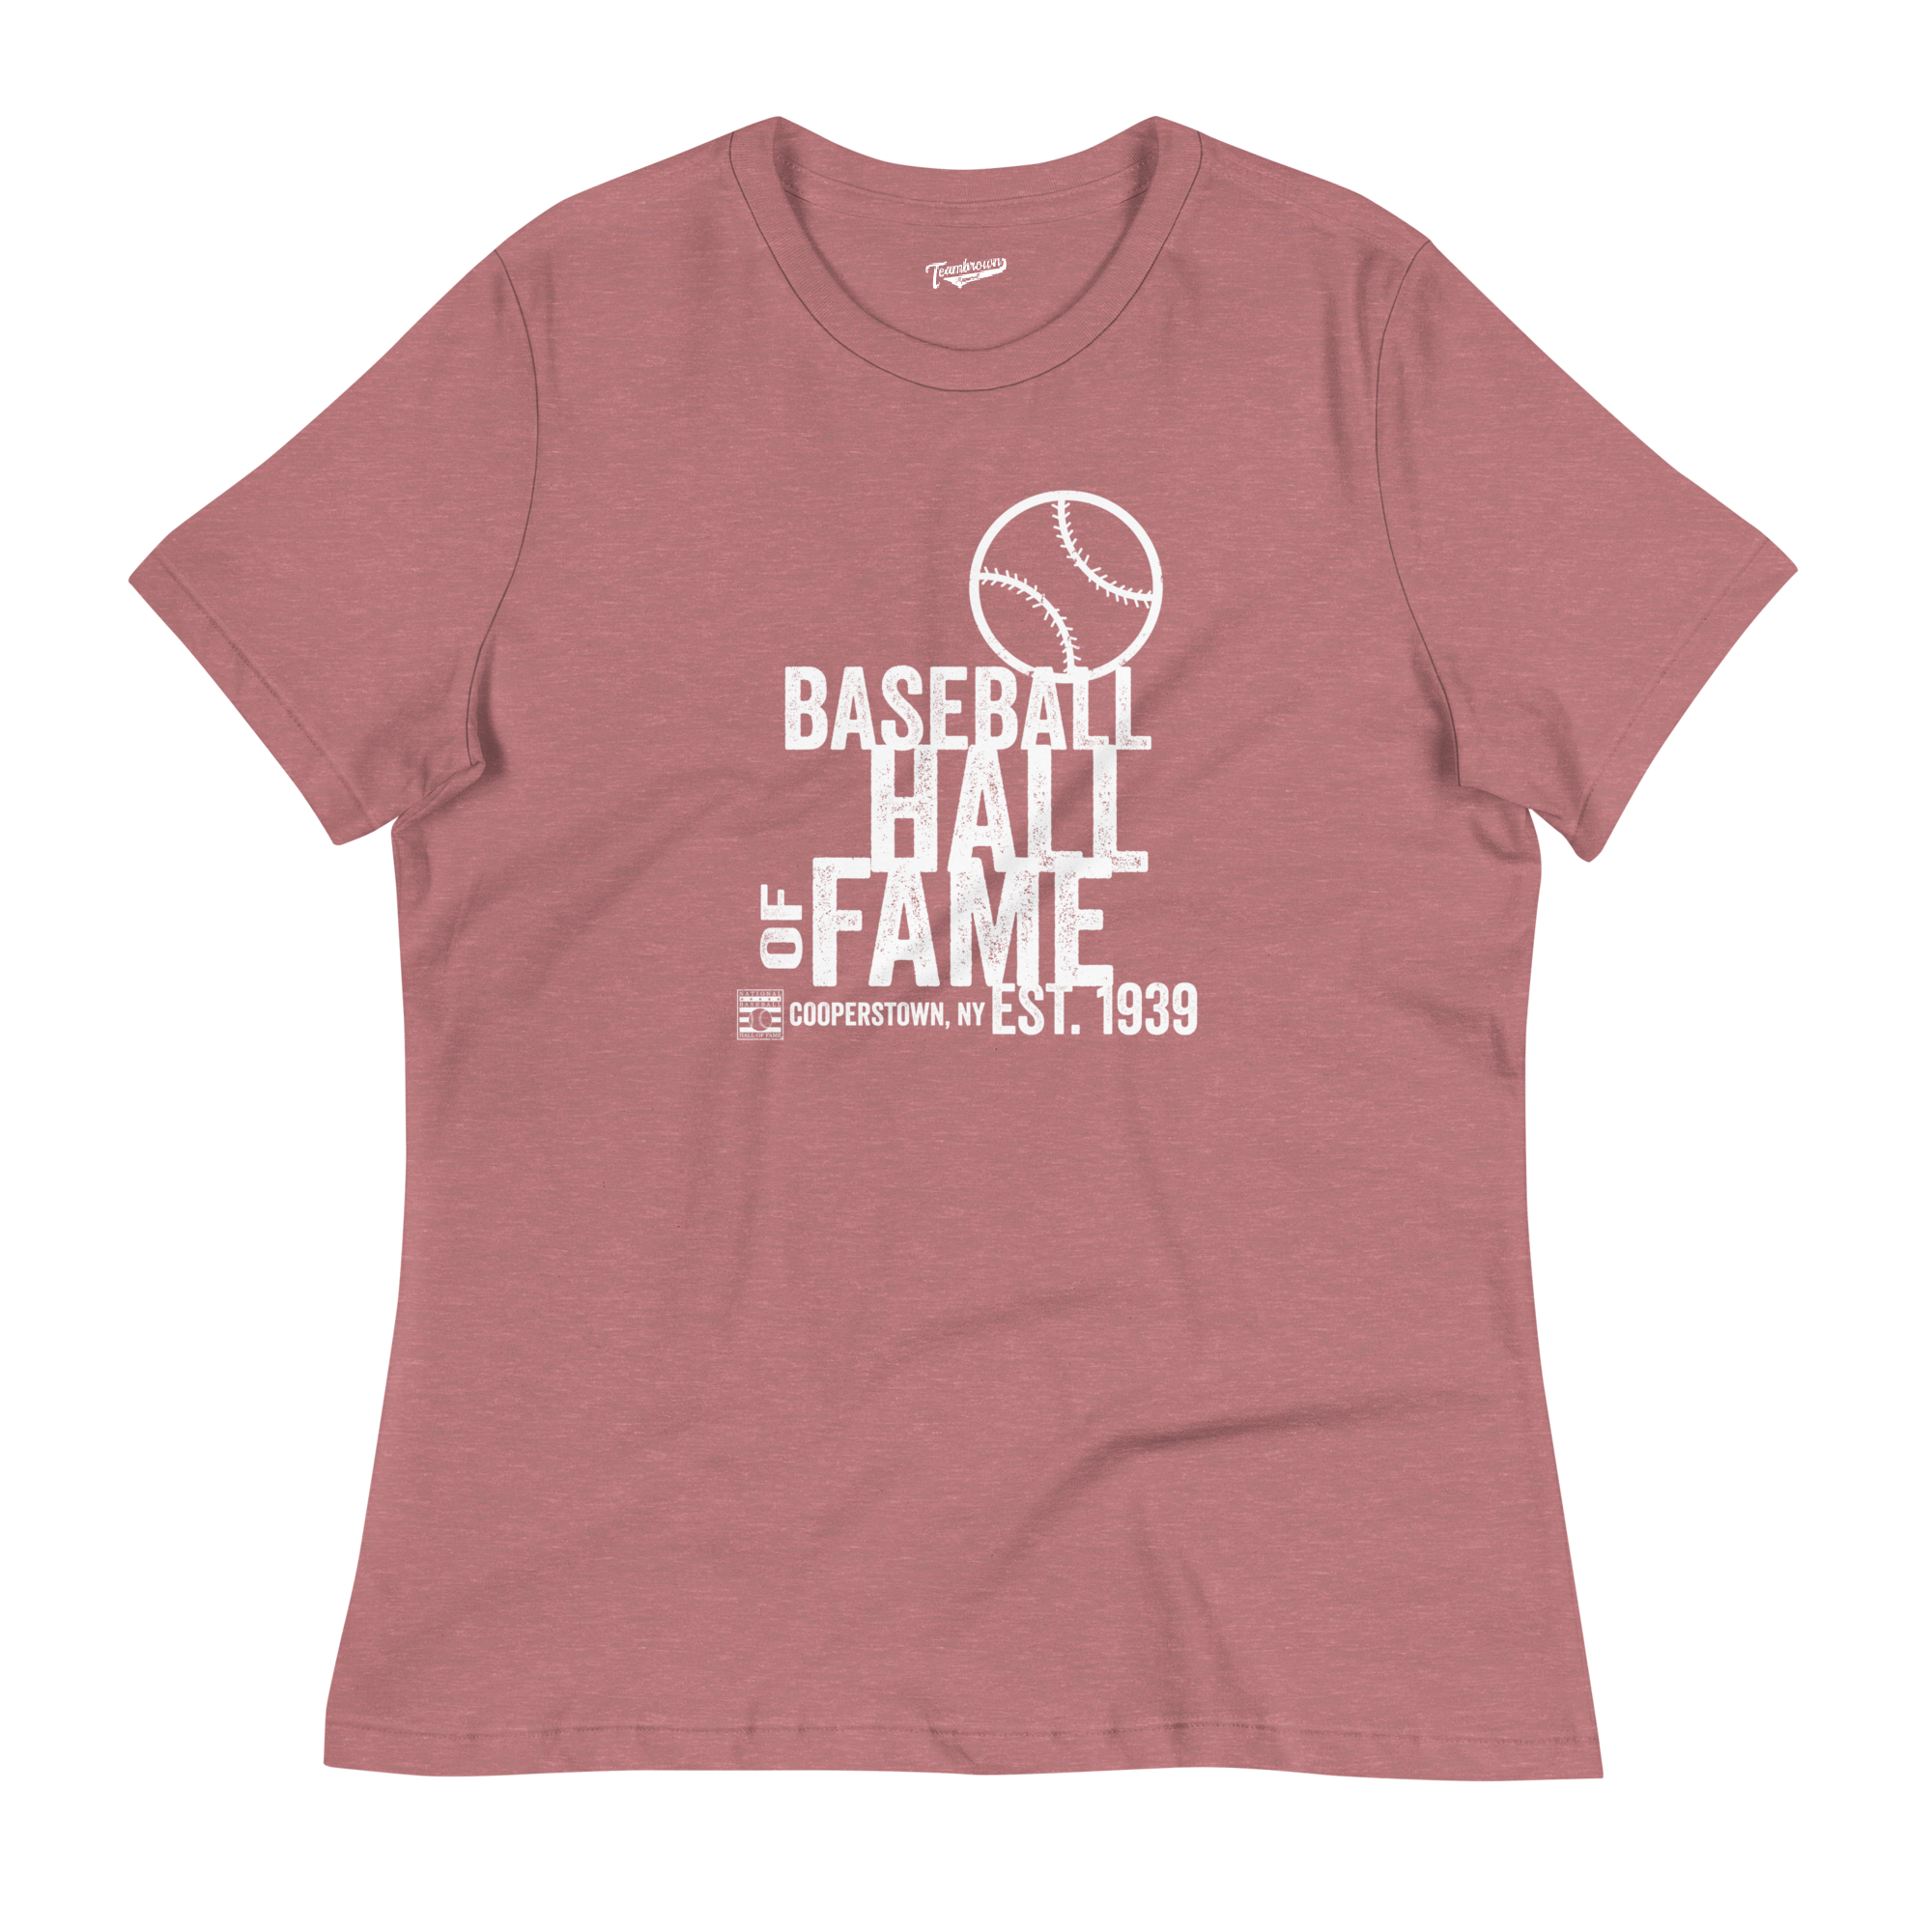 Baseball Hall of Fame - Retro - Women's Relaxed Fit T-Shirt